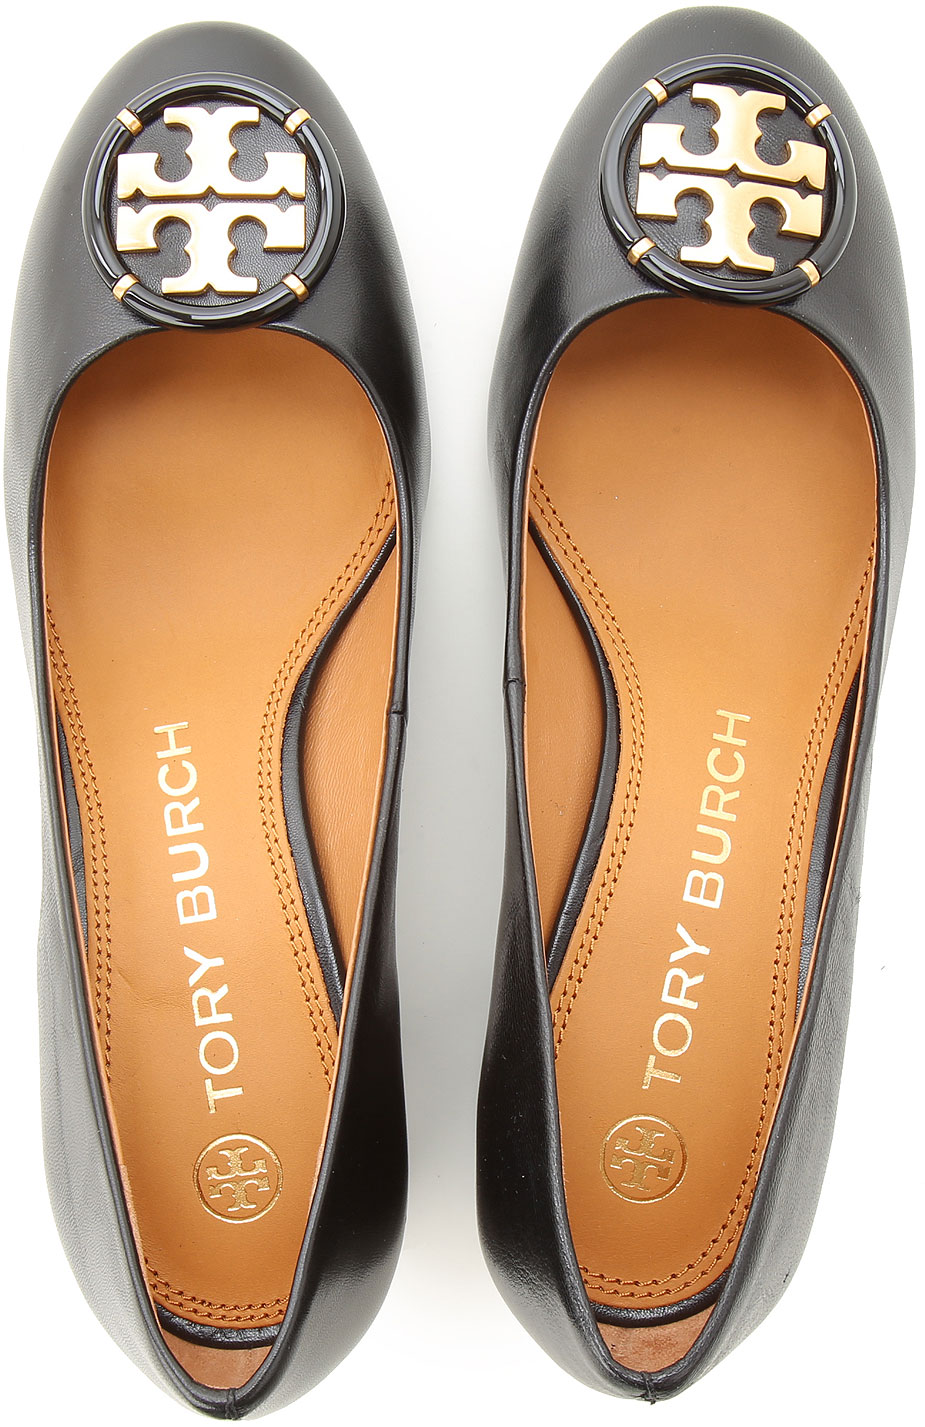 Womens Shoes Tory Burch, Style code: 76483-006-